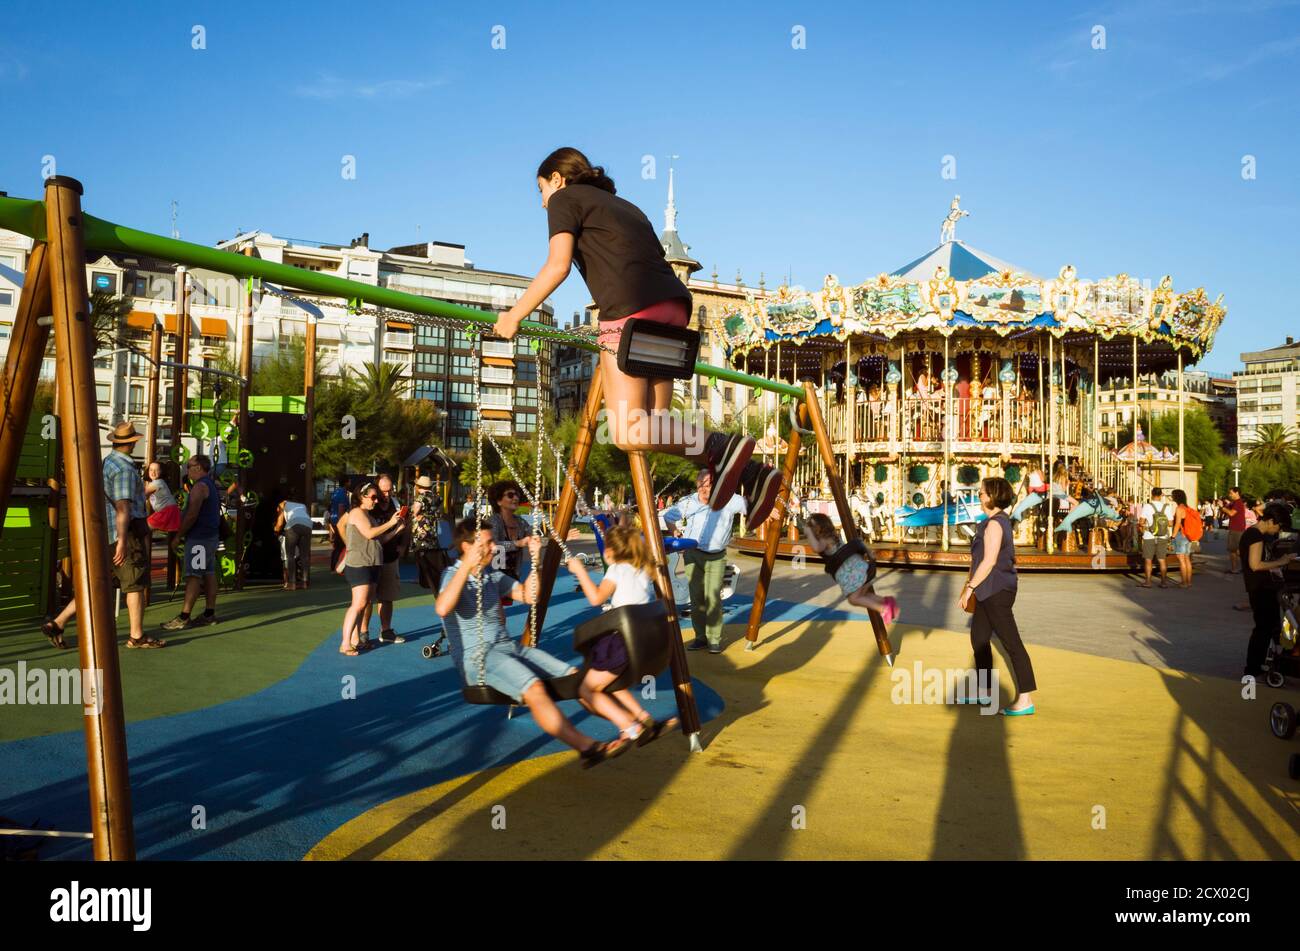 Donostia, Gipuzkoa, Basque Country, Spain - July 15th, 2019 : Children play in a swing next to the vintage style merry-go-round. Stock Photo